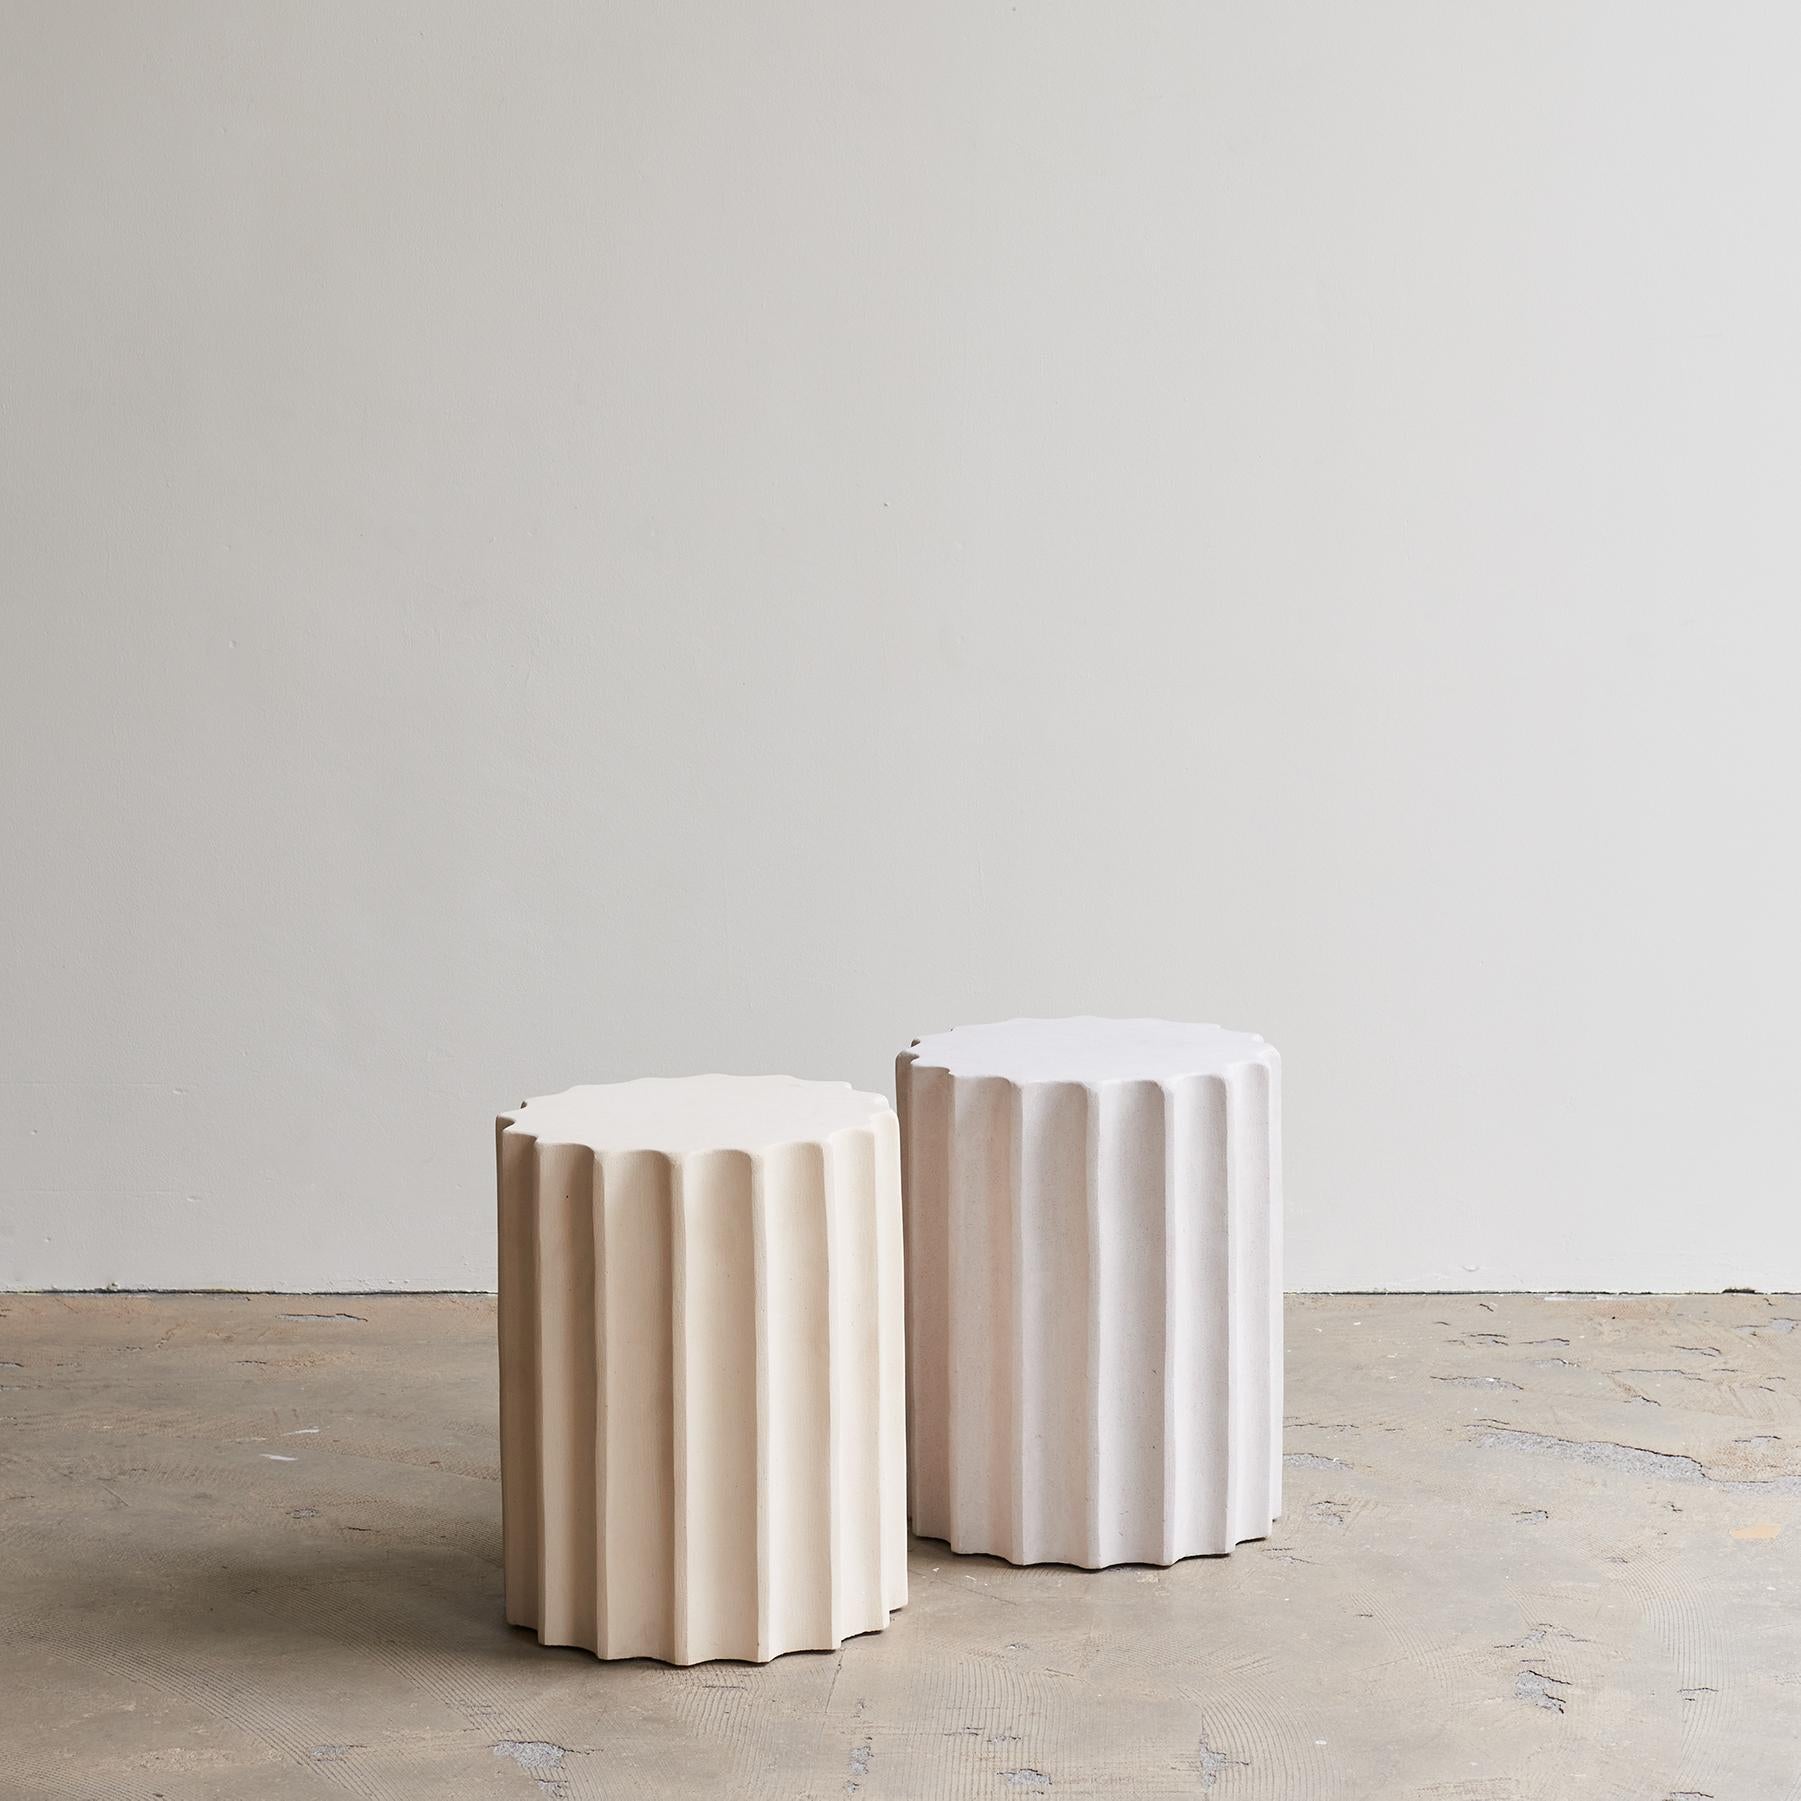 Set Of 2 Column Duo Side Tables by Atelier Ledure
One Of A Kind.
Dimensions: D 34 x W 34 x H 42 cm.
Materials: Clay.

Reimagining the past and reshaping our future
The Column I series brings back architecture to its basic principles; questioning